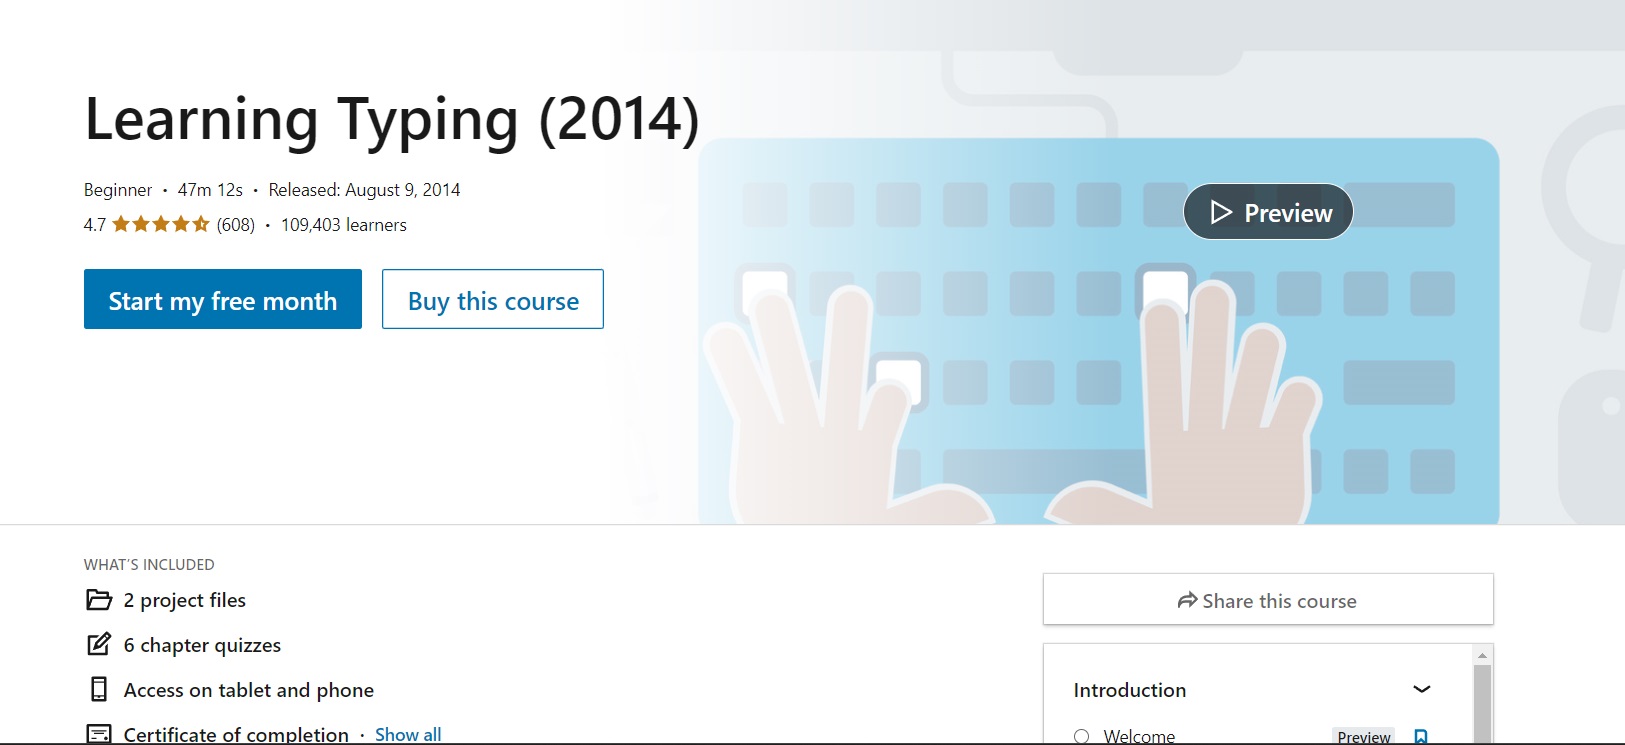 Learning Typing 2014 By LinkedIn Learning